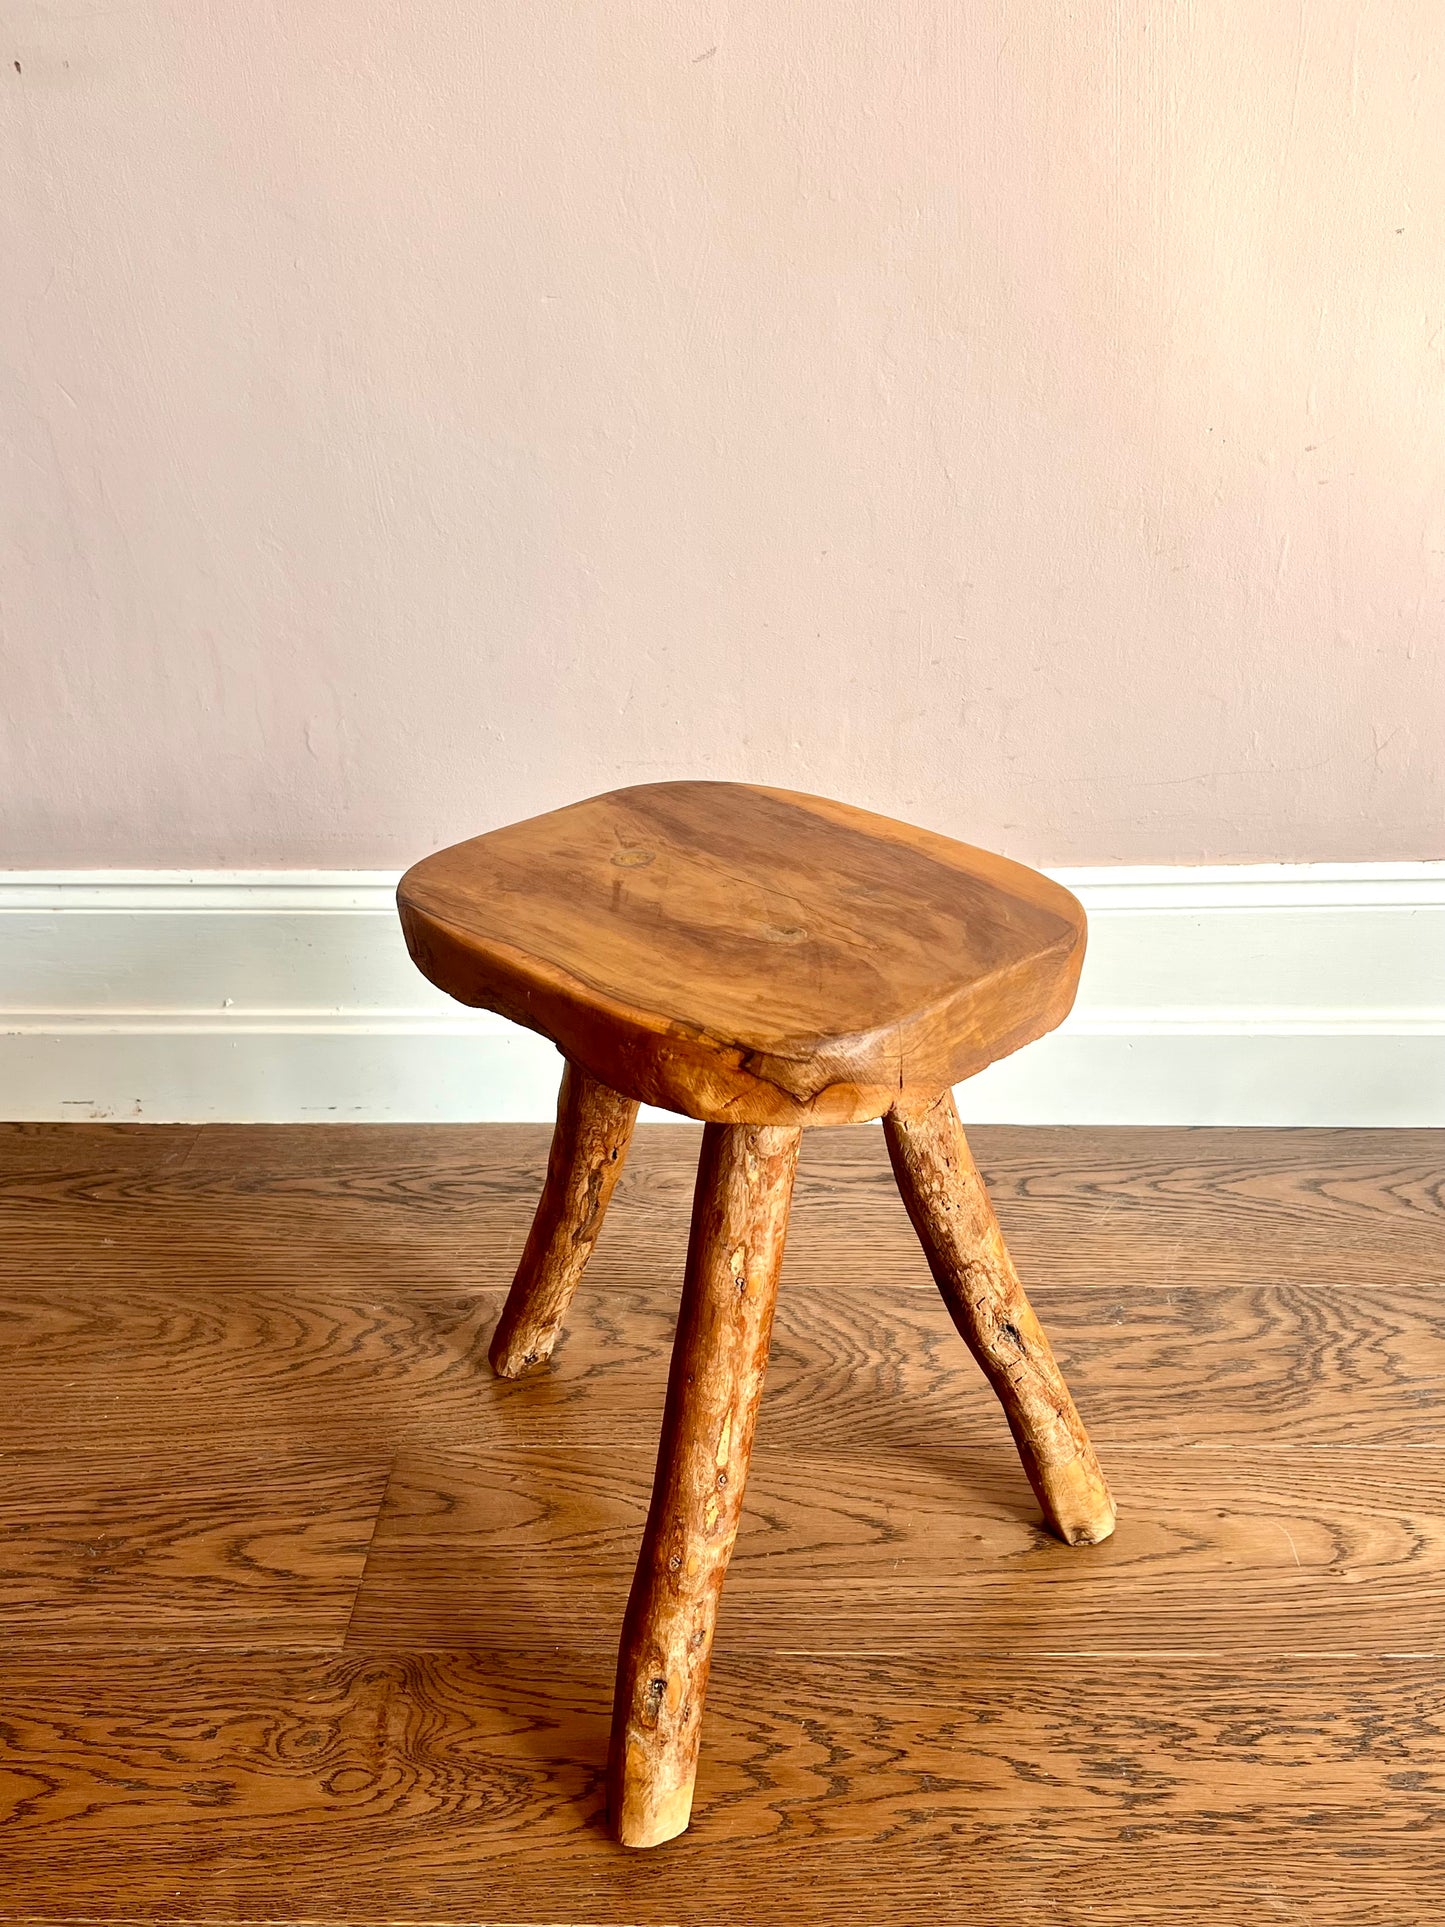 1960s French Primitive Brutalist Tripod Stool (One of Two Available)